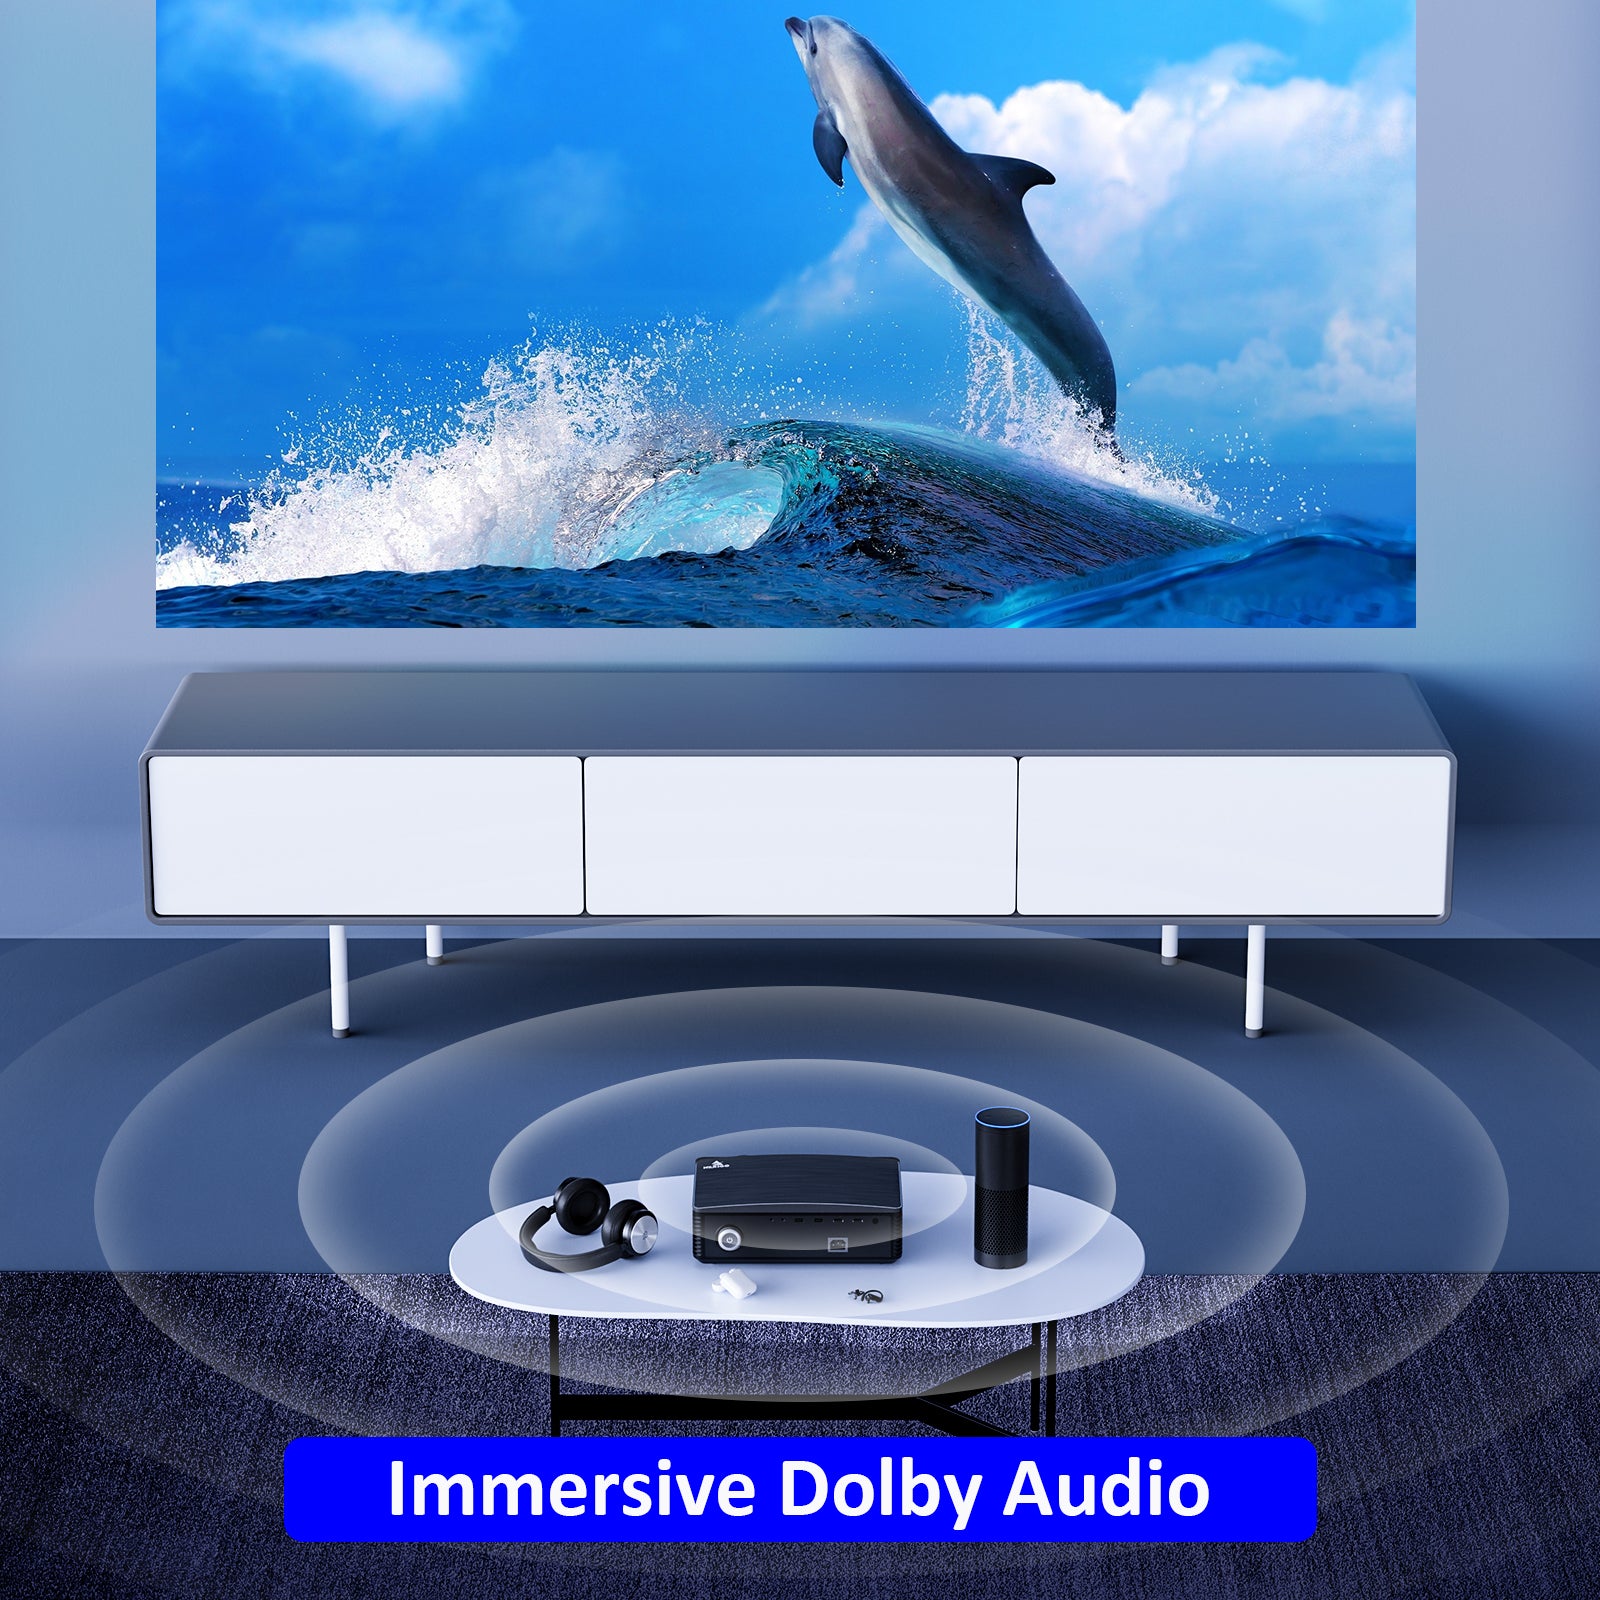 Built-in Dolby speakers provide immersive sound. Bluetooth 5.1 ensures stable connections.